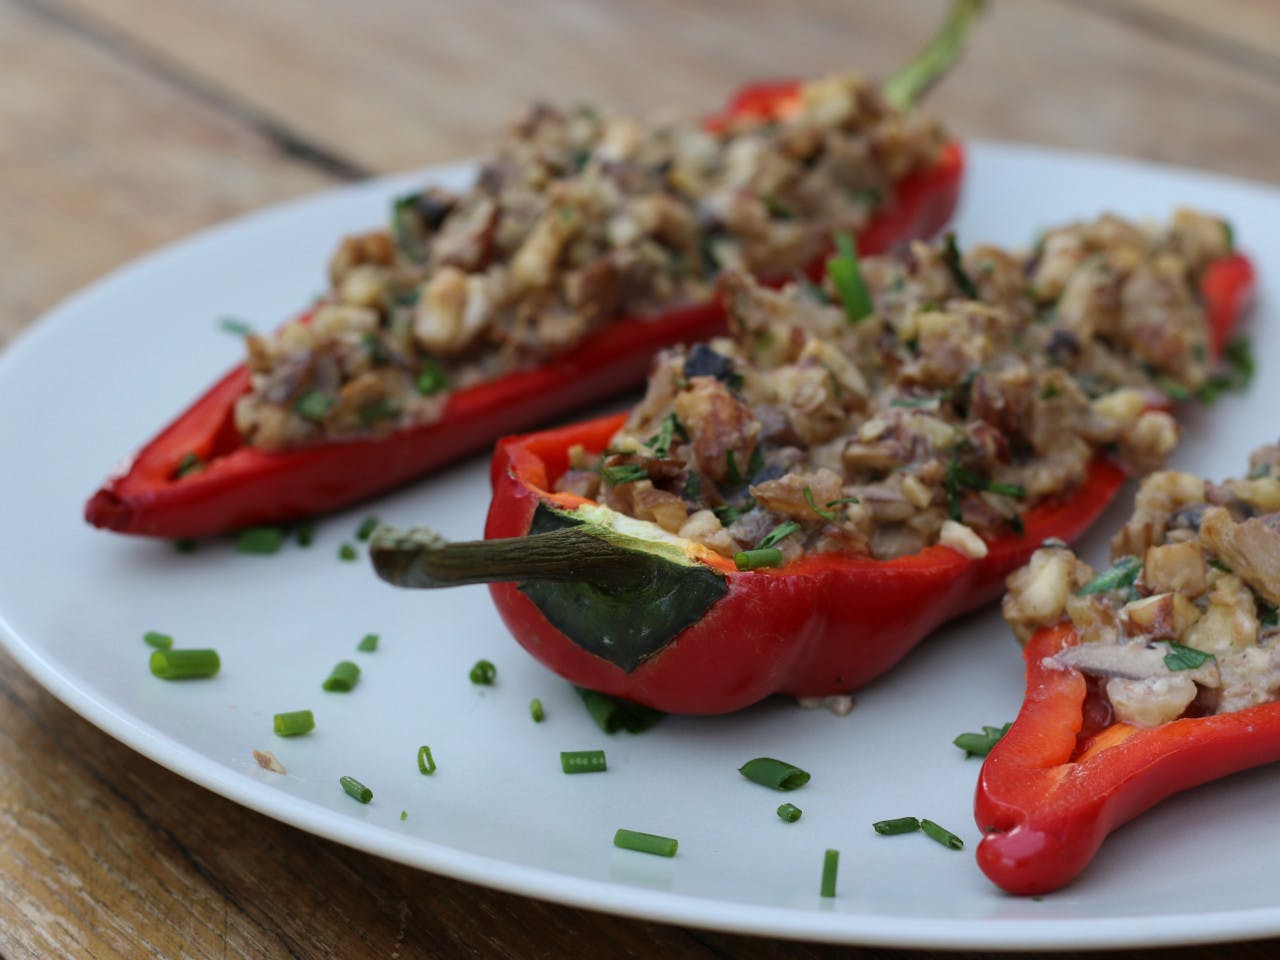 Stuffed pointed peppers with nut mushroom